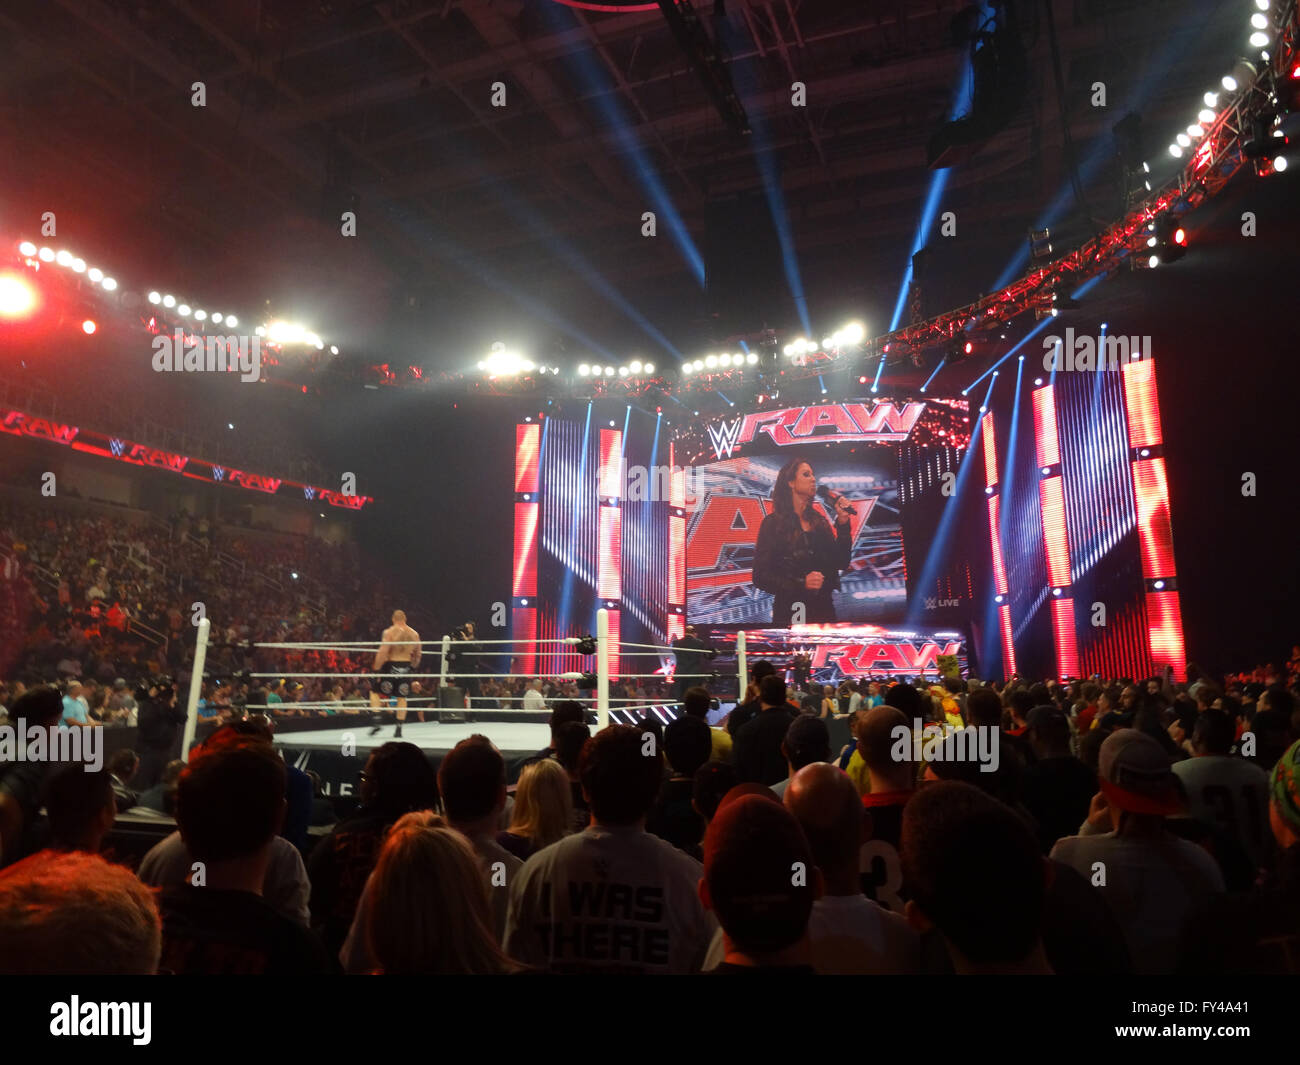 SAN JOSE - MARCH 30: The Beast Brock Lesner stands in the ring ready for action with Stephanie McMahon on screen holding mic during live taping of WWE Monday Night Raw at the SAP Center in San Jose, California on March 30, 2015. Stock Photo